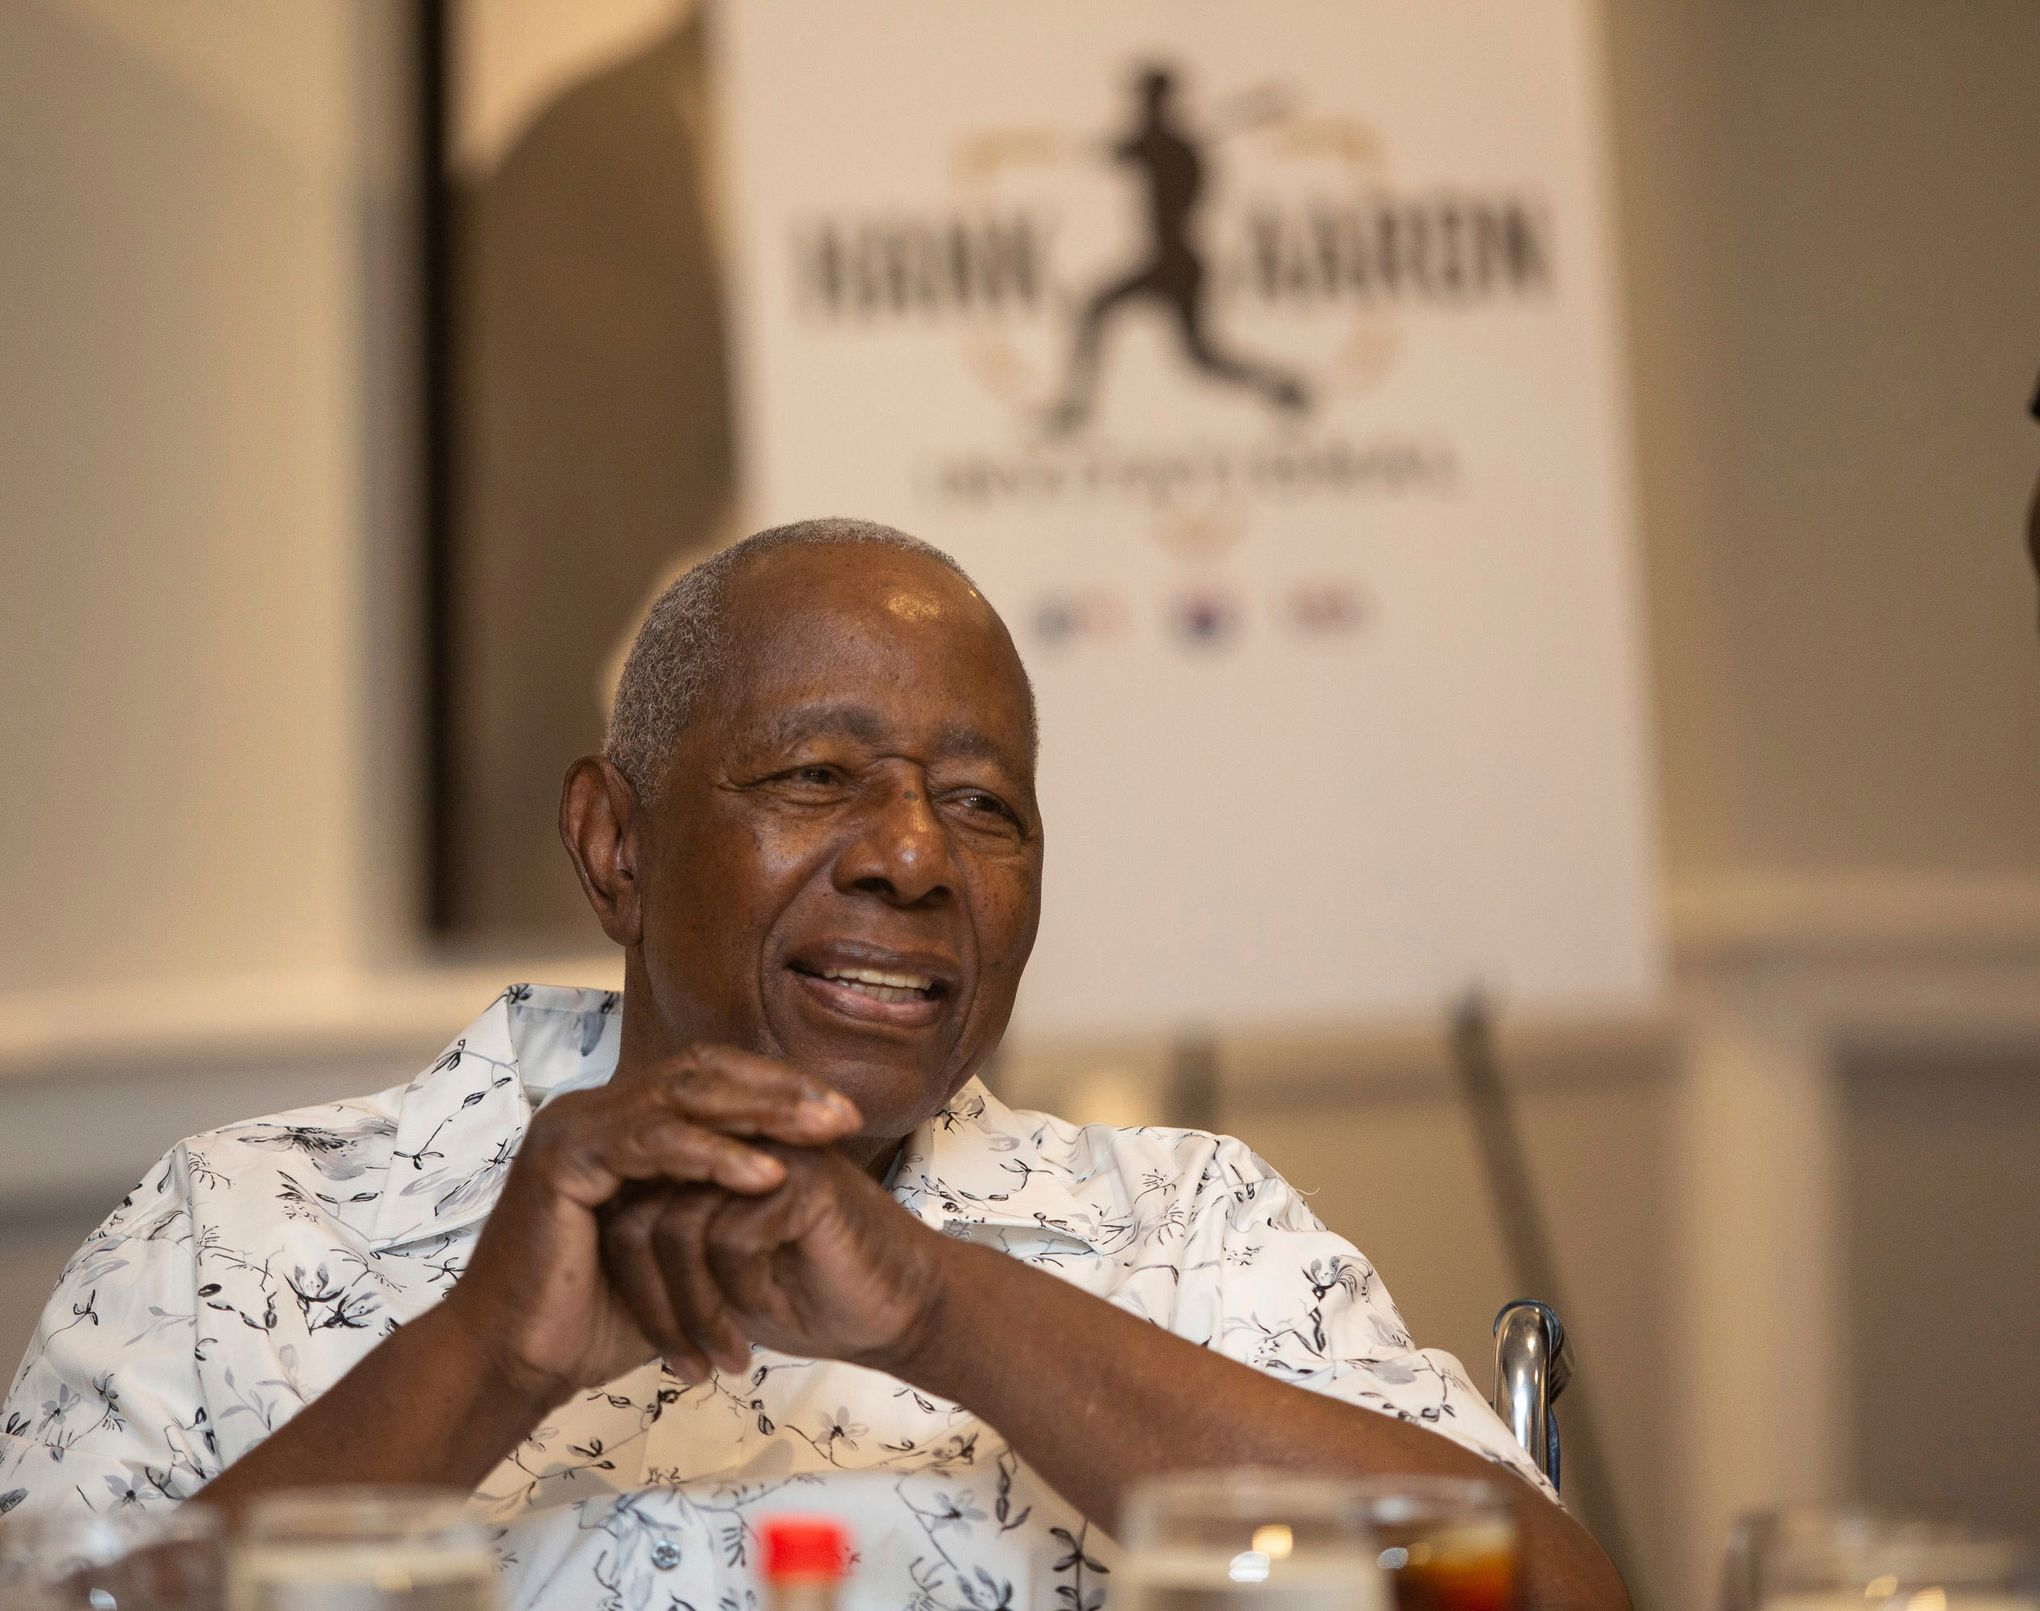 Baseball's home run king Hank Aaron fought racism on and off the field